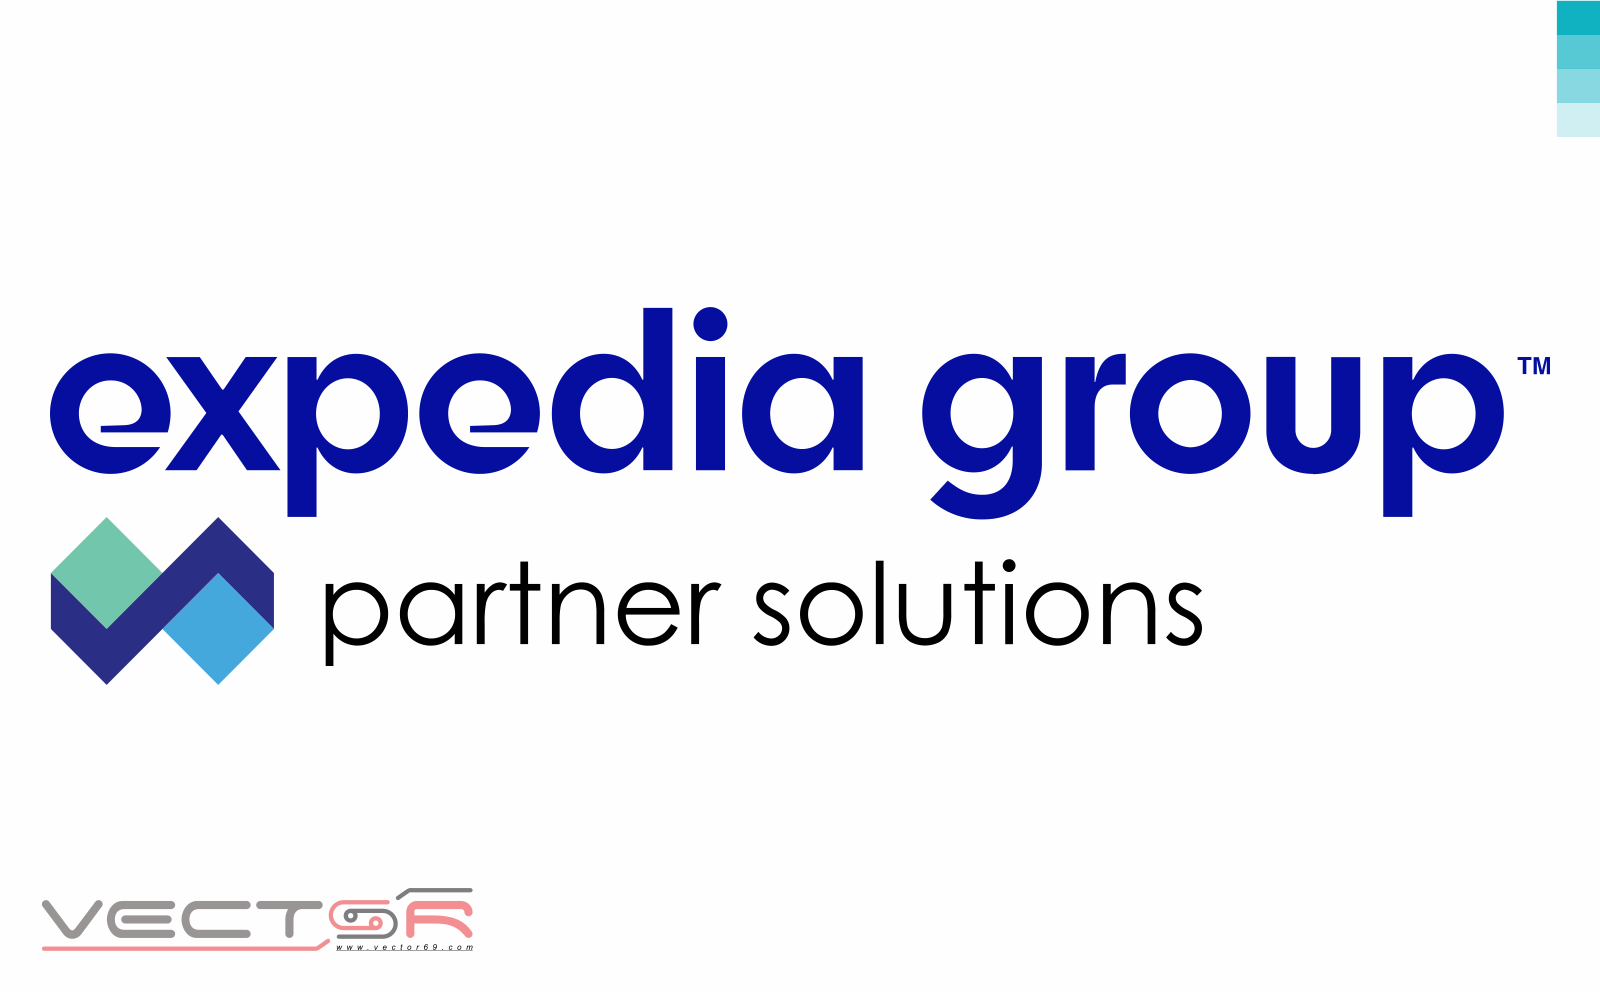 Expedia Group Partner Solutions Logo - Download Vector File SVG (Scalable Vector Graphics)